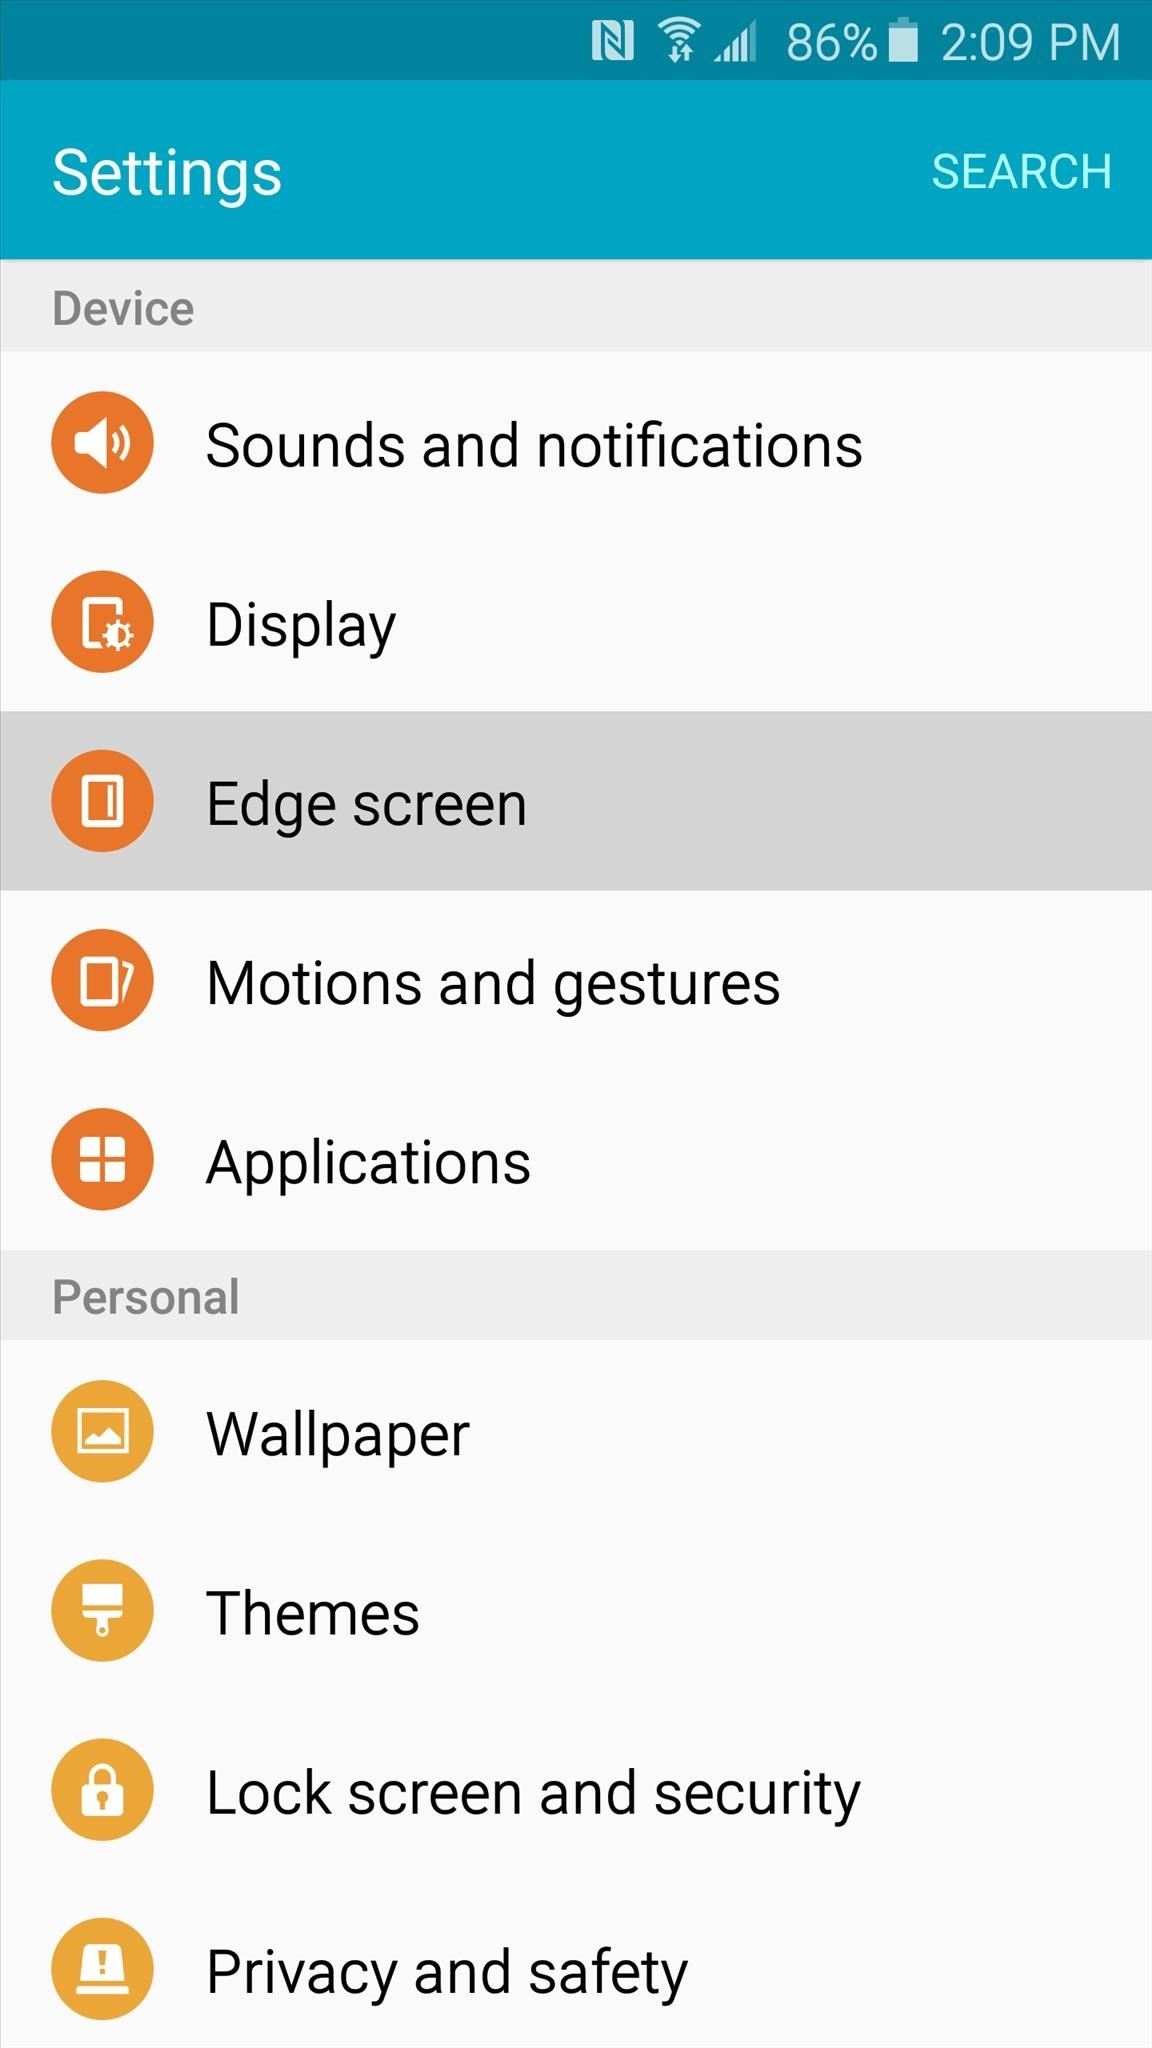 How to Launch Apps While the Screen Is Off on Your Galaxy S6 Edge